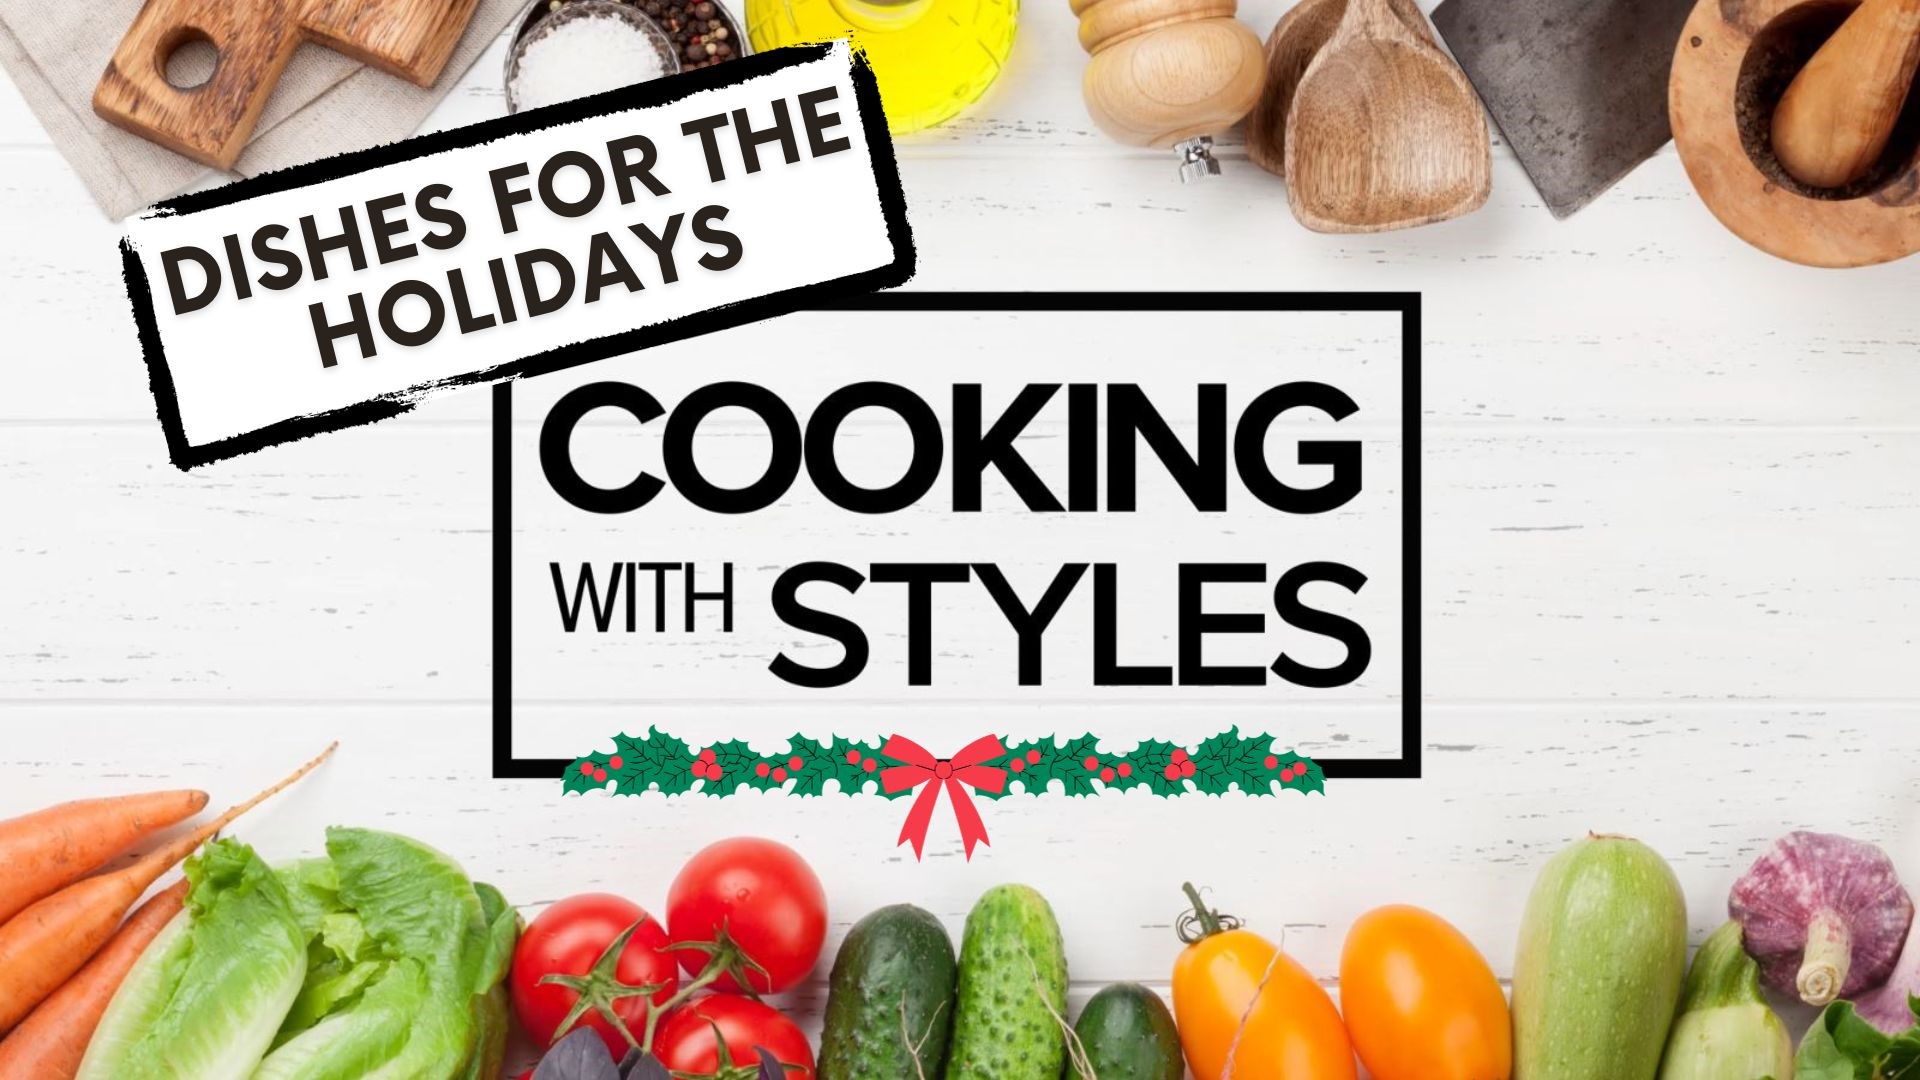 Shawn Styles shares some of his favorite dishes for those upcoming holiday parties or family get togethers.